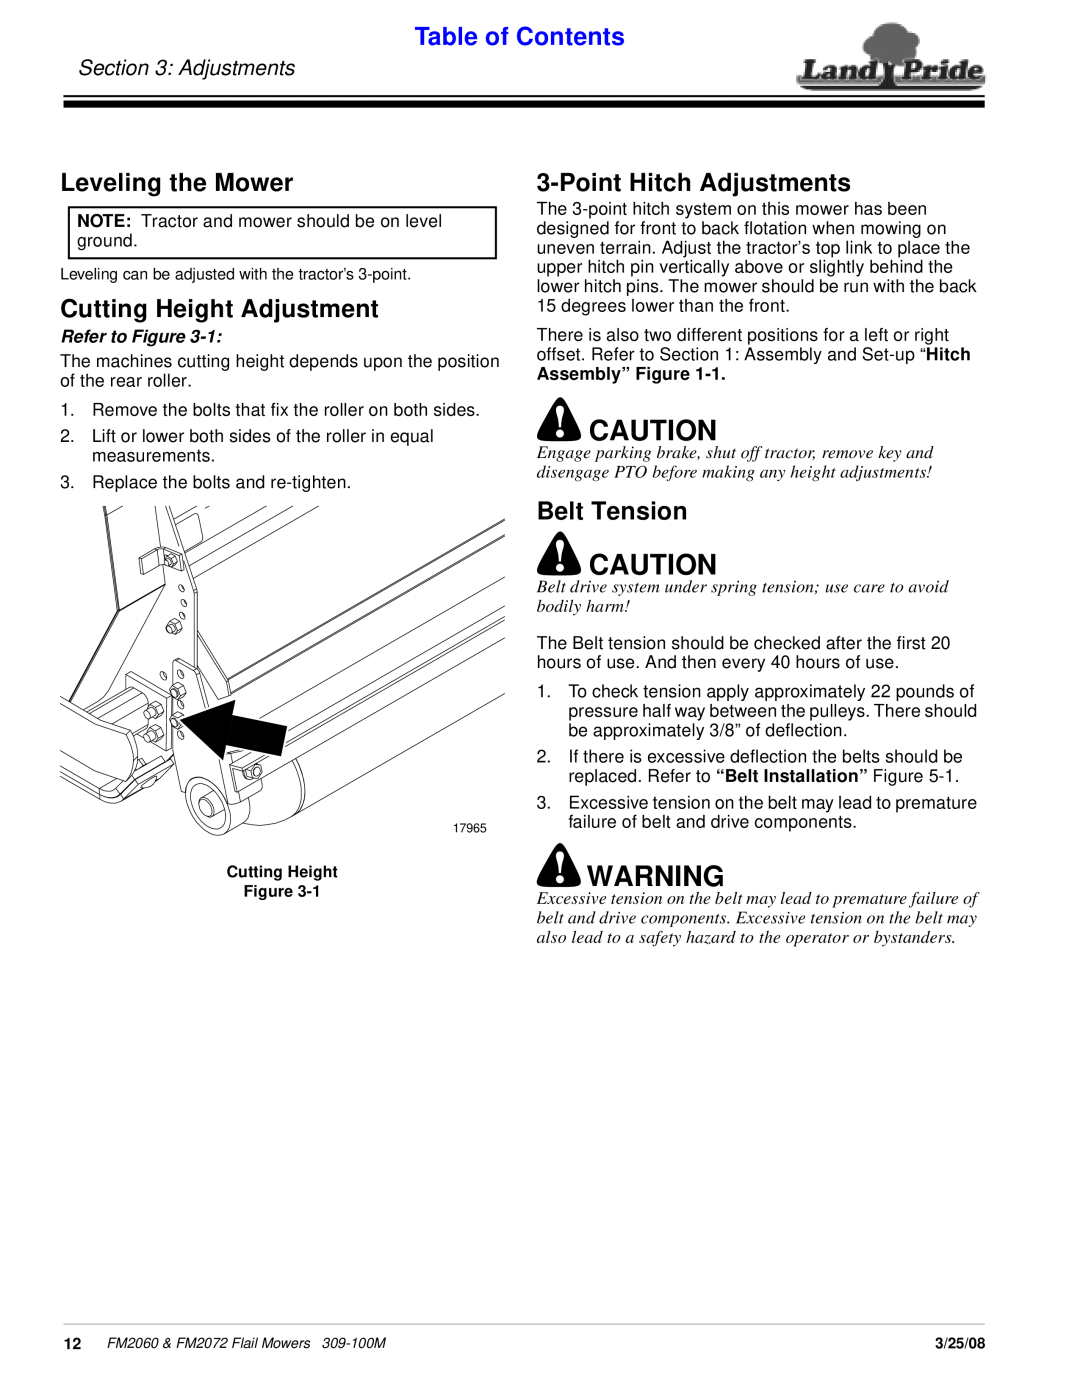 Land Pride 309-100M Leveling the Mower, Cutting Height Adjustment, PointHitch Adjustments, Belt Tension, Table of Contents 